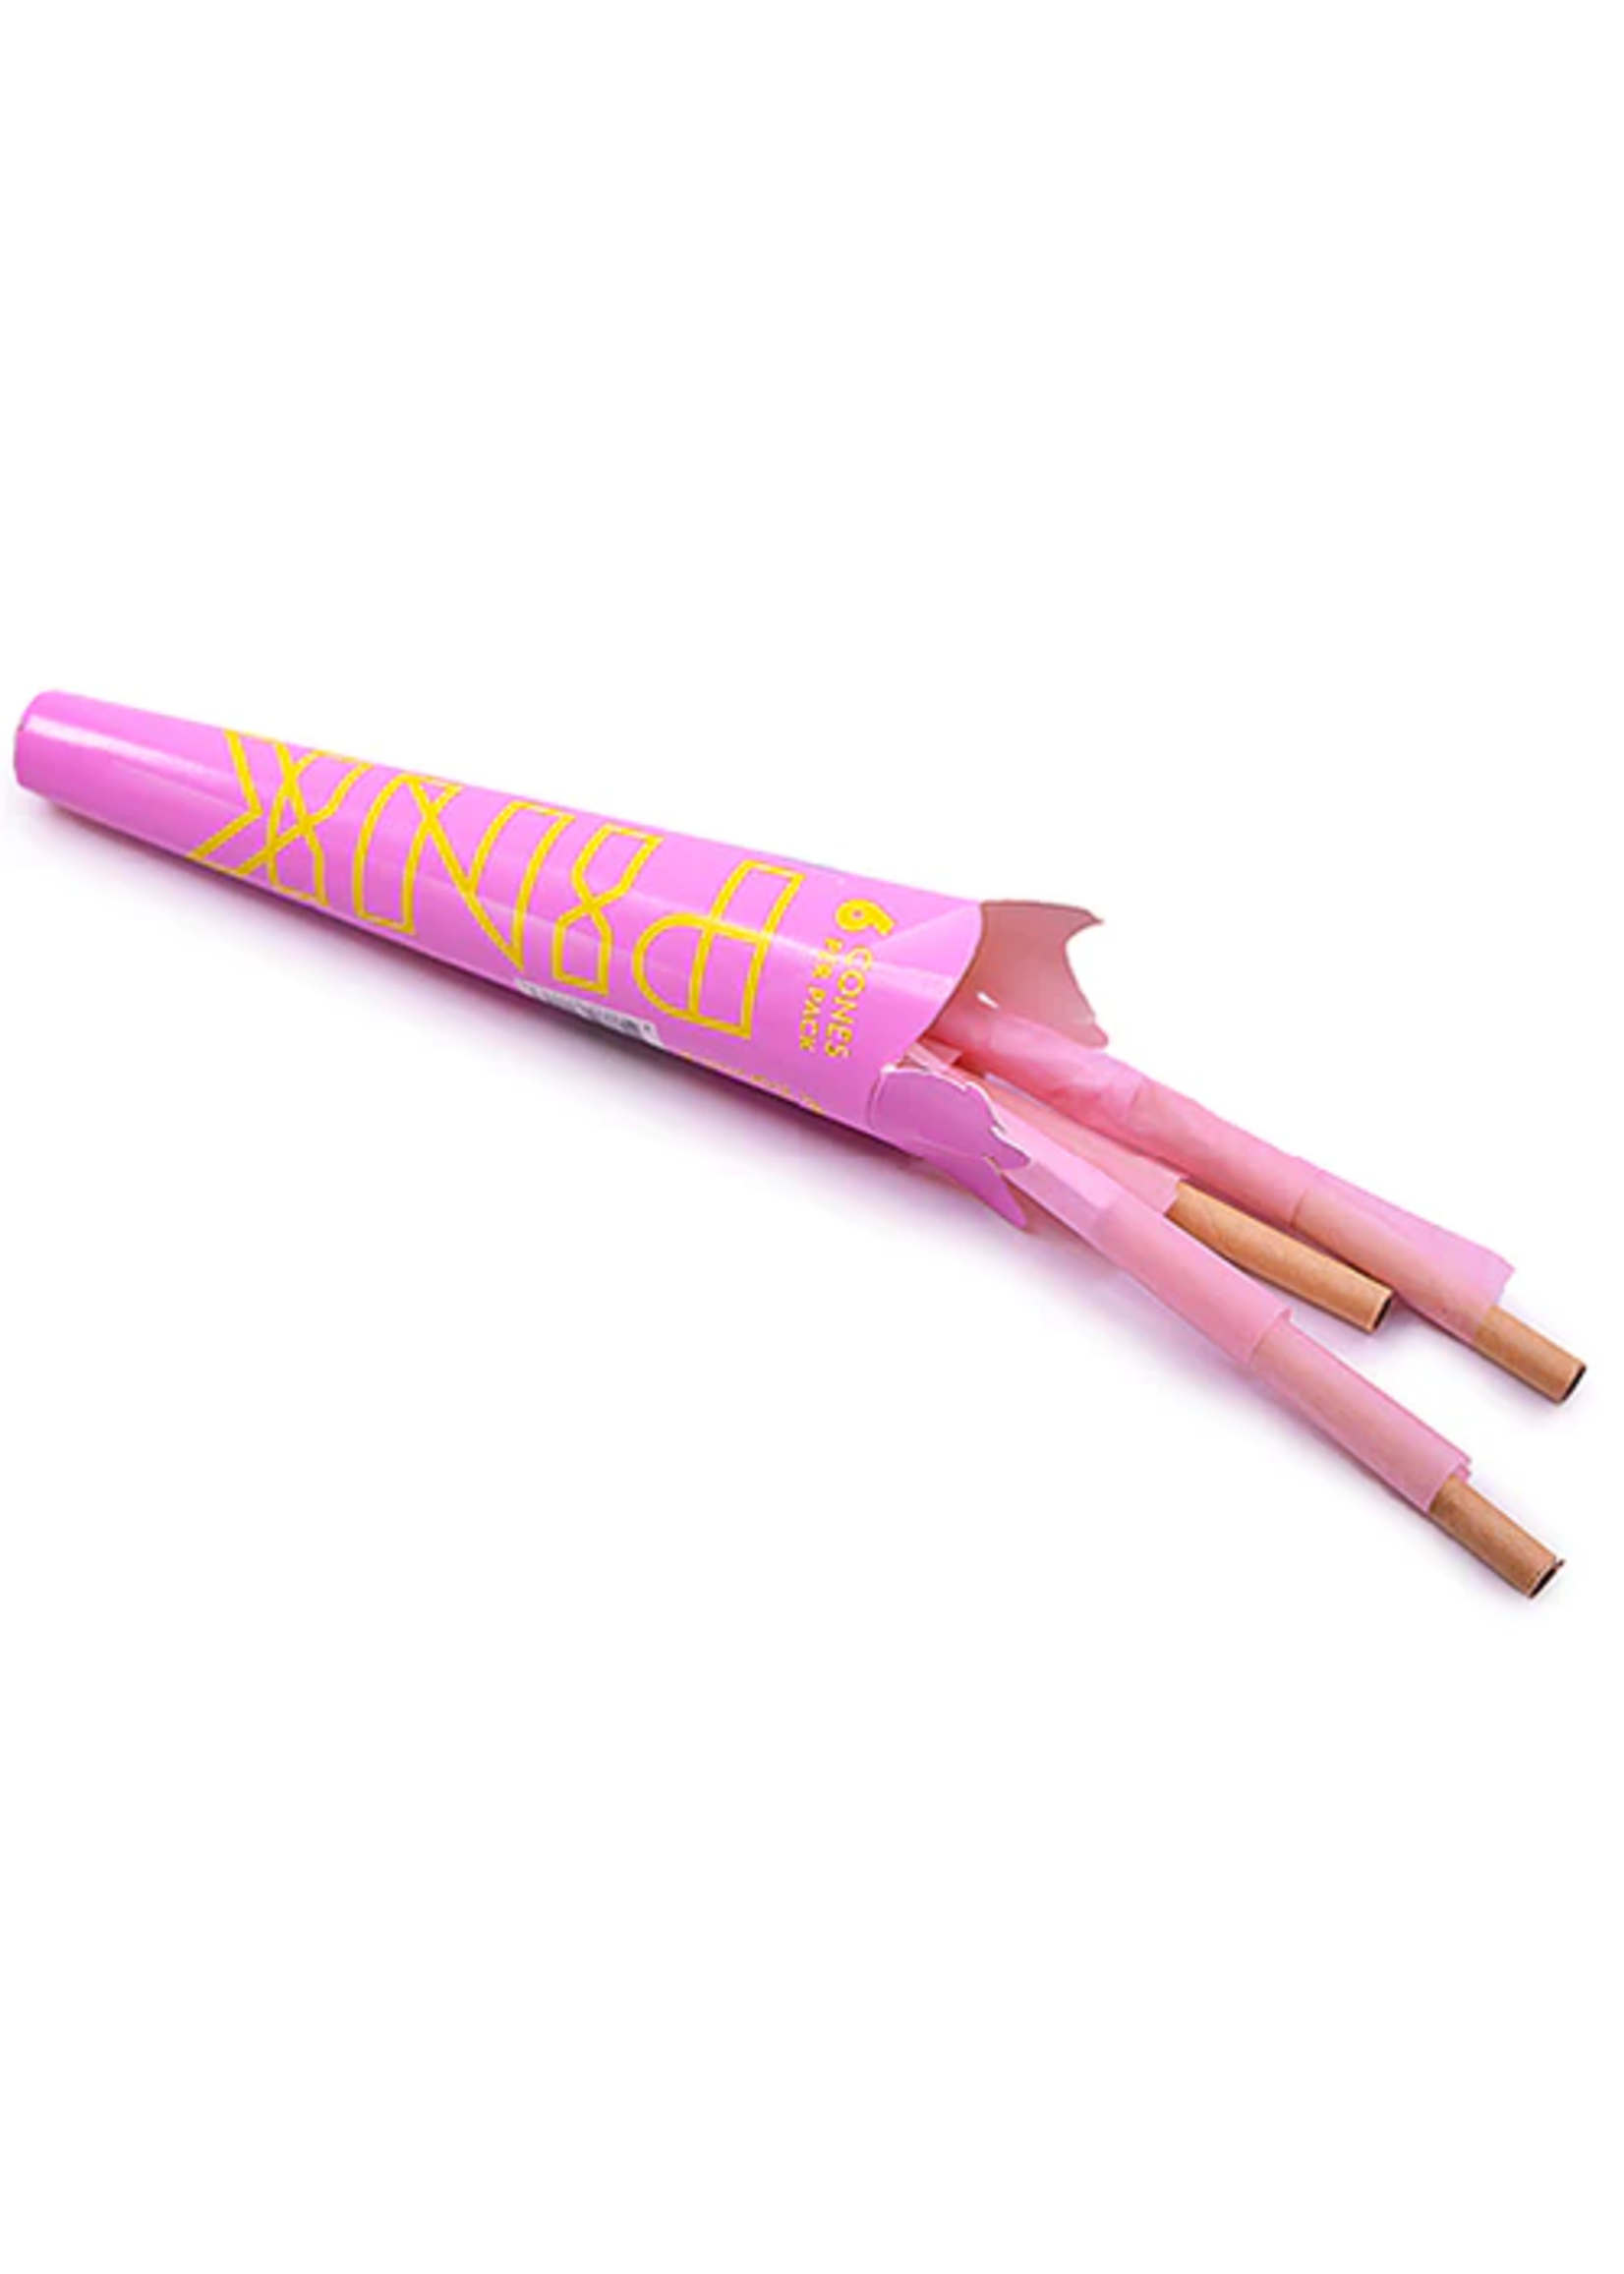 PINK PINK CONES KING SIZE